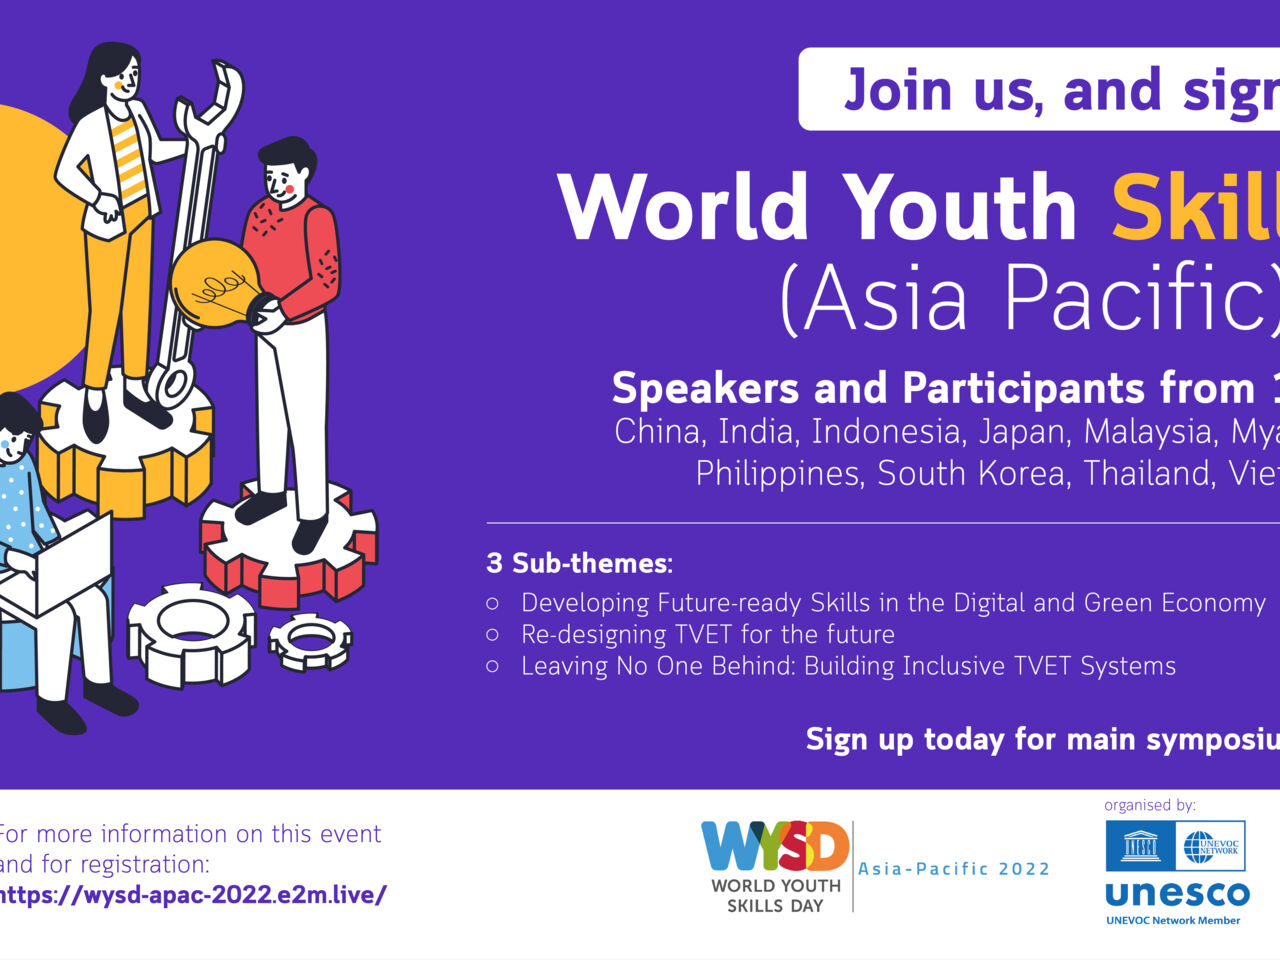 Asia Pacific celebrates World Youth Skills Day 2022